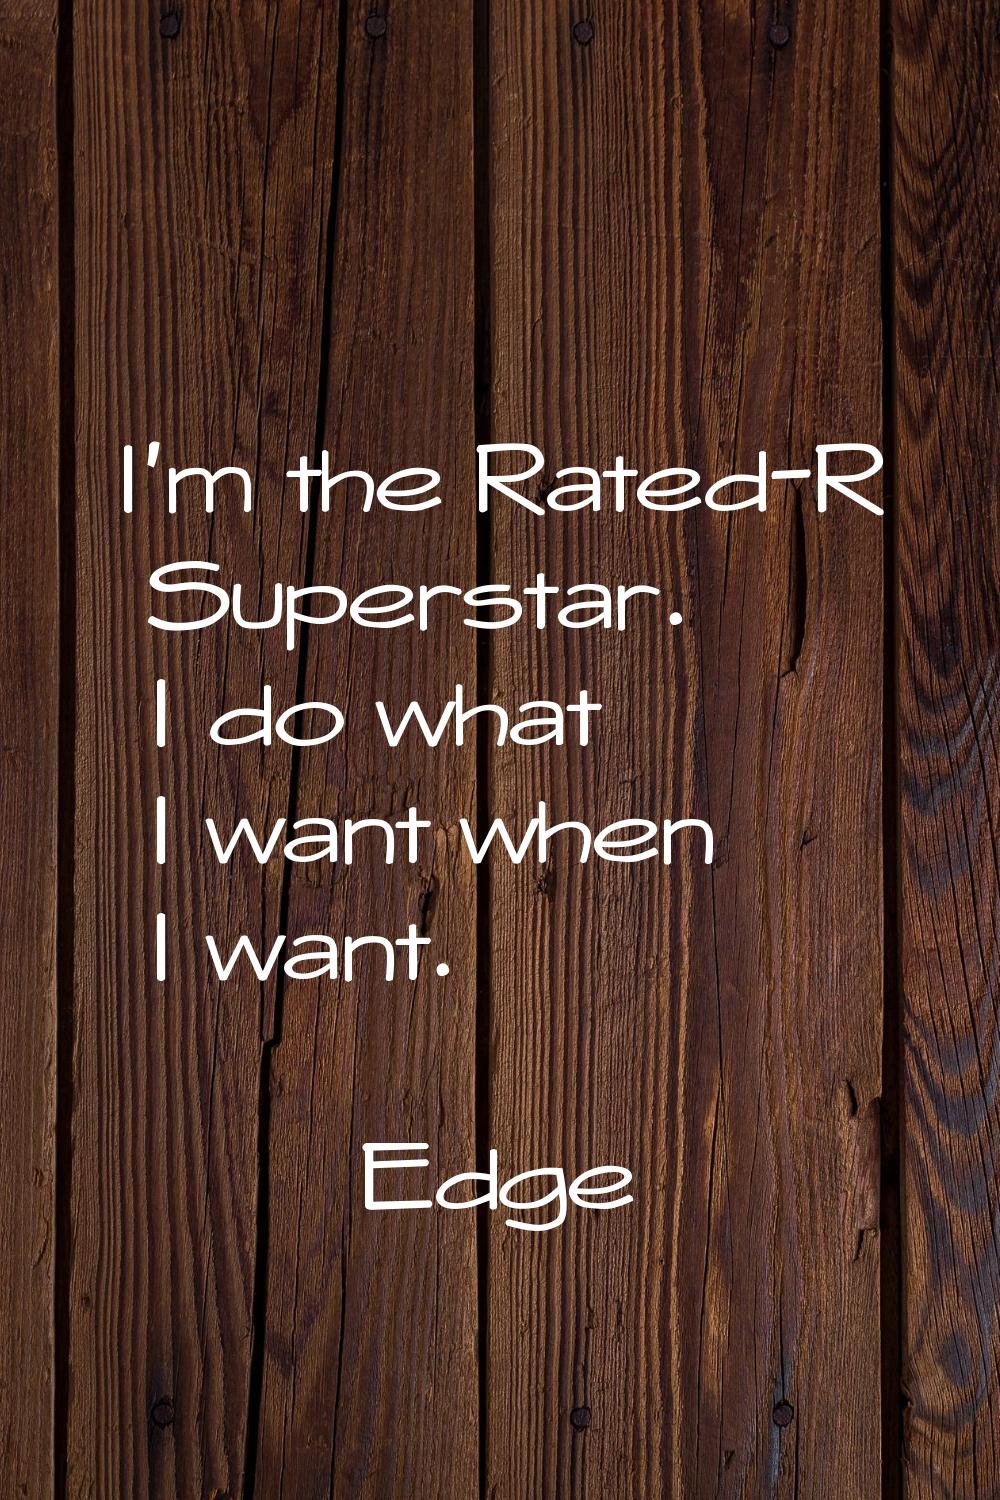 I'm the Rated-R Superstar. I do what I want when I want.